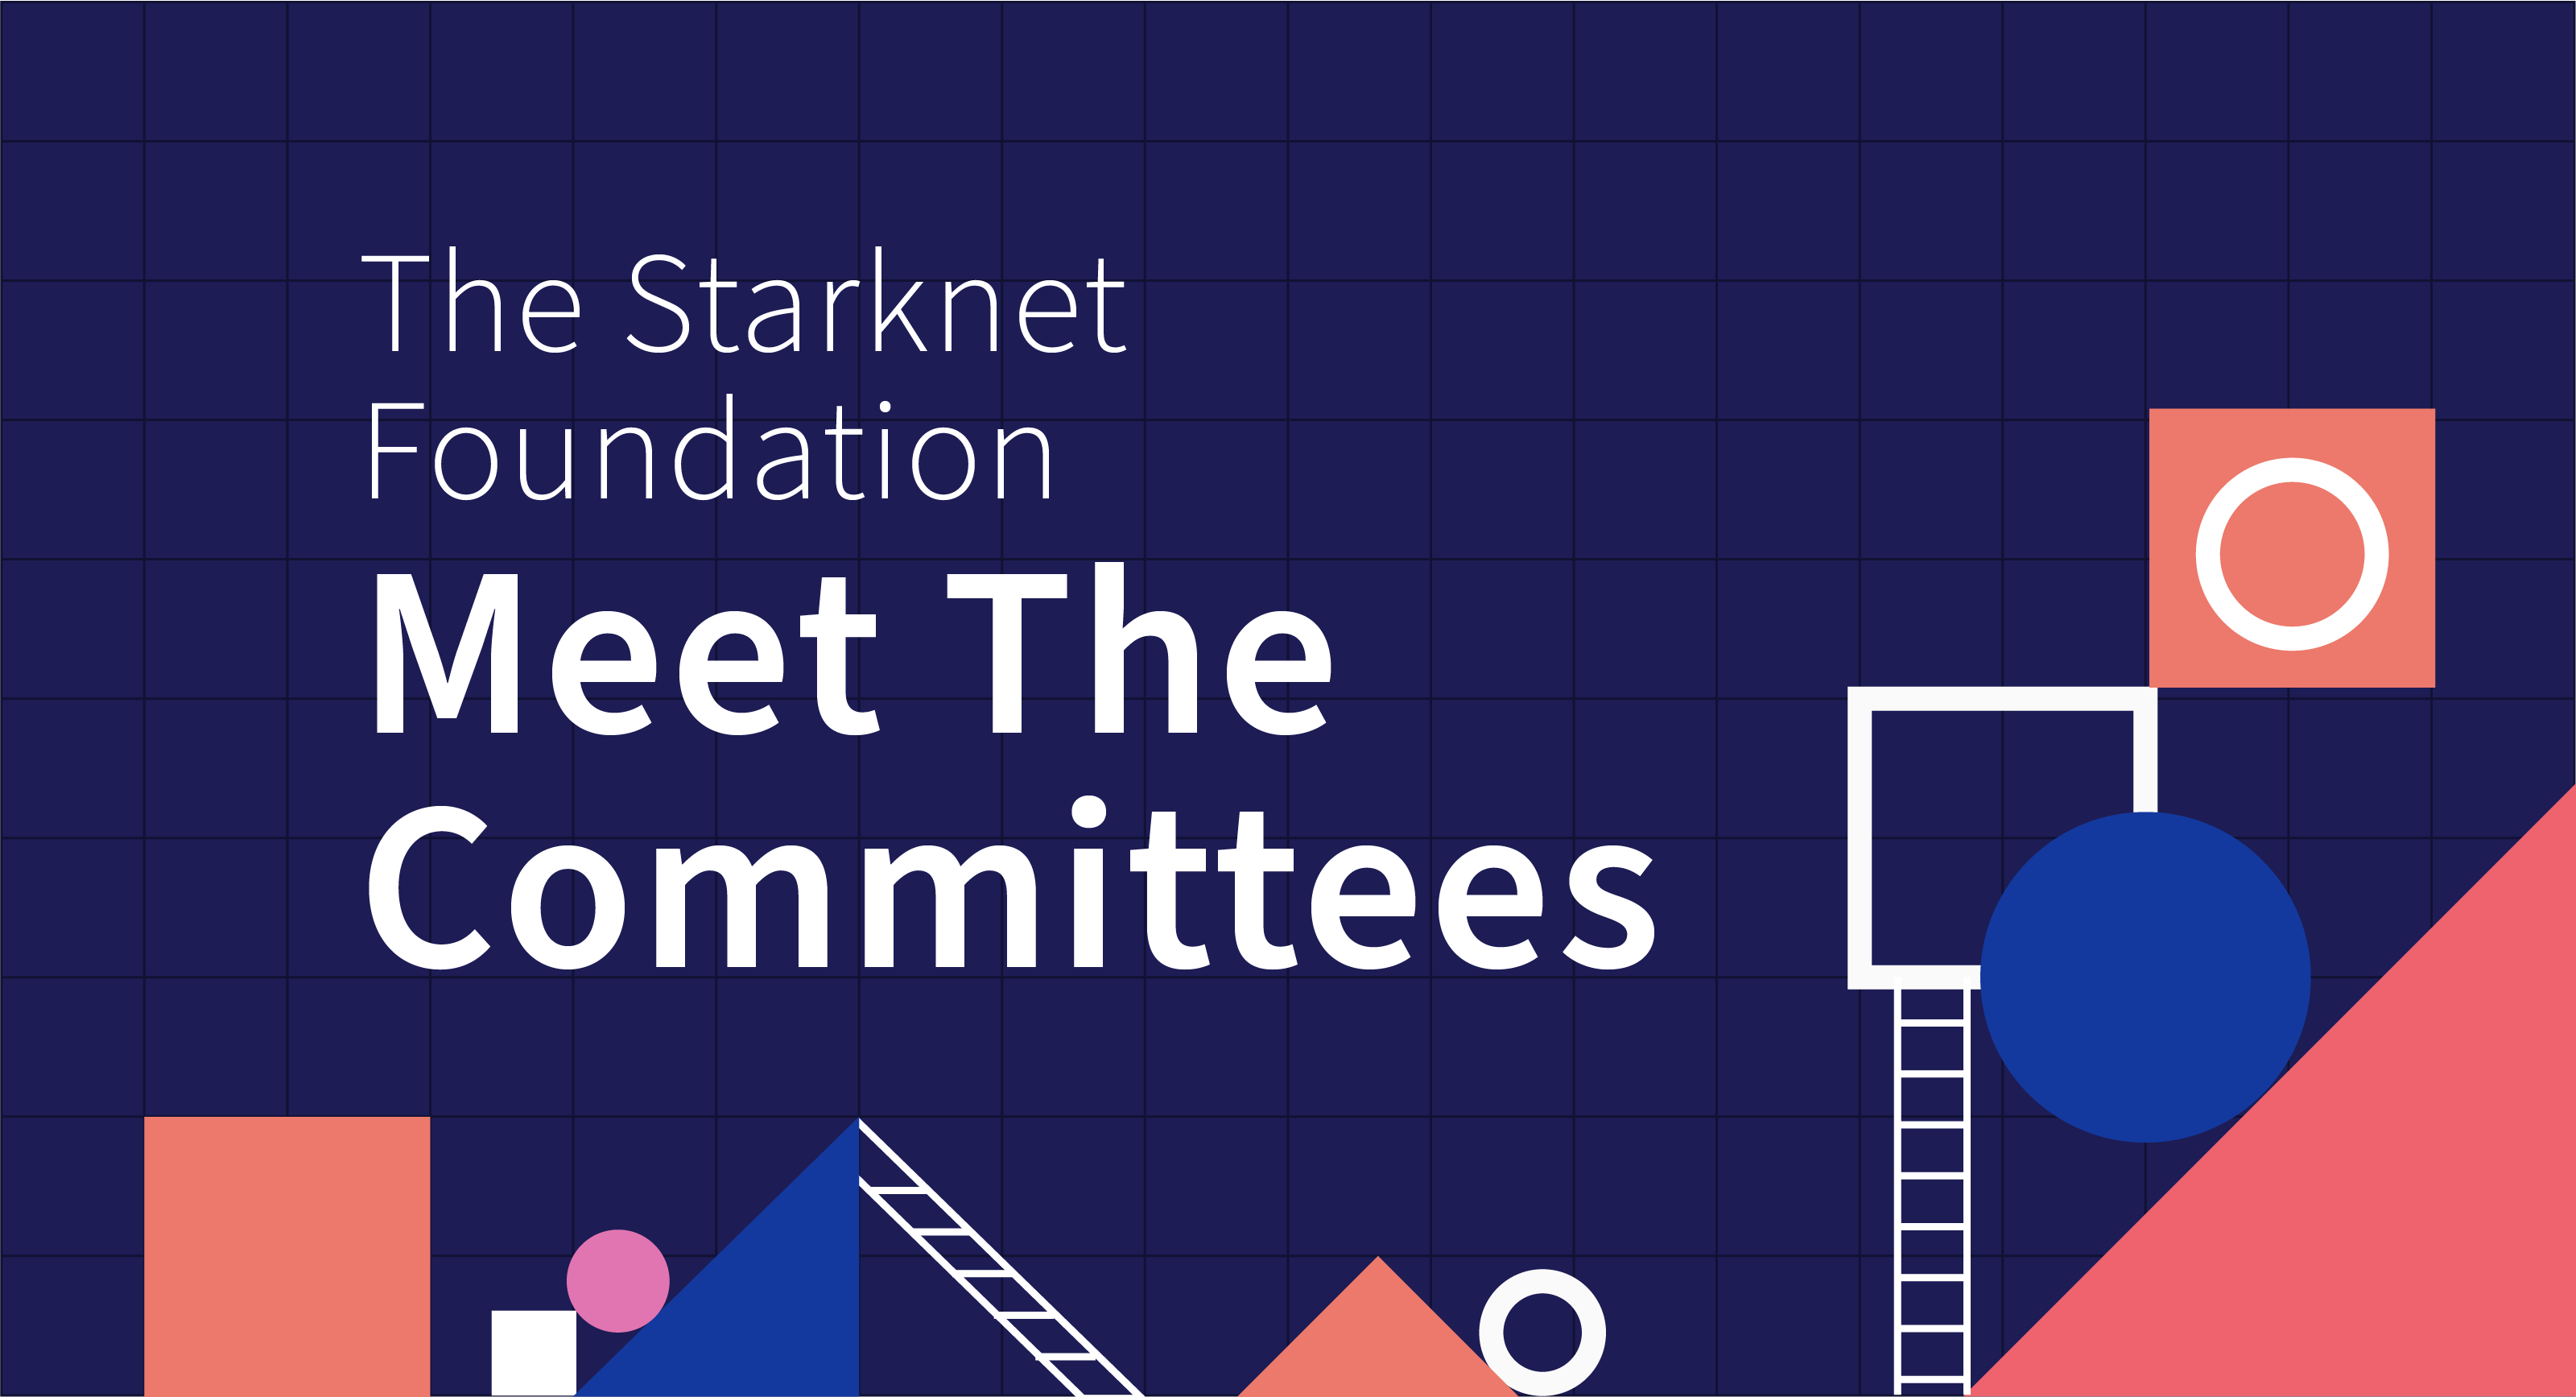 The Starknet Foundation: Meet the Committees